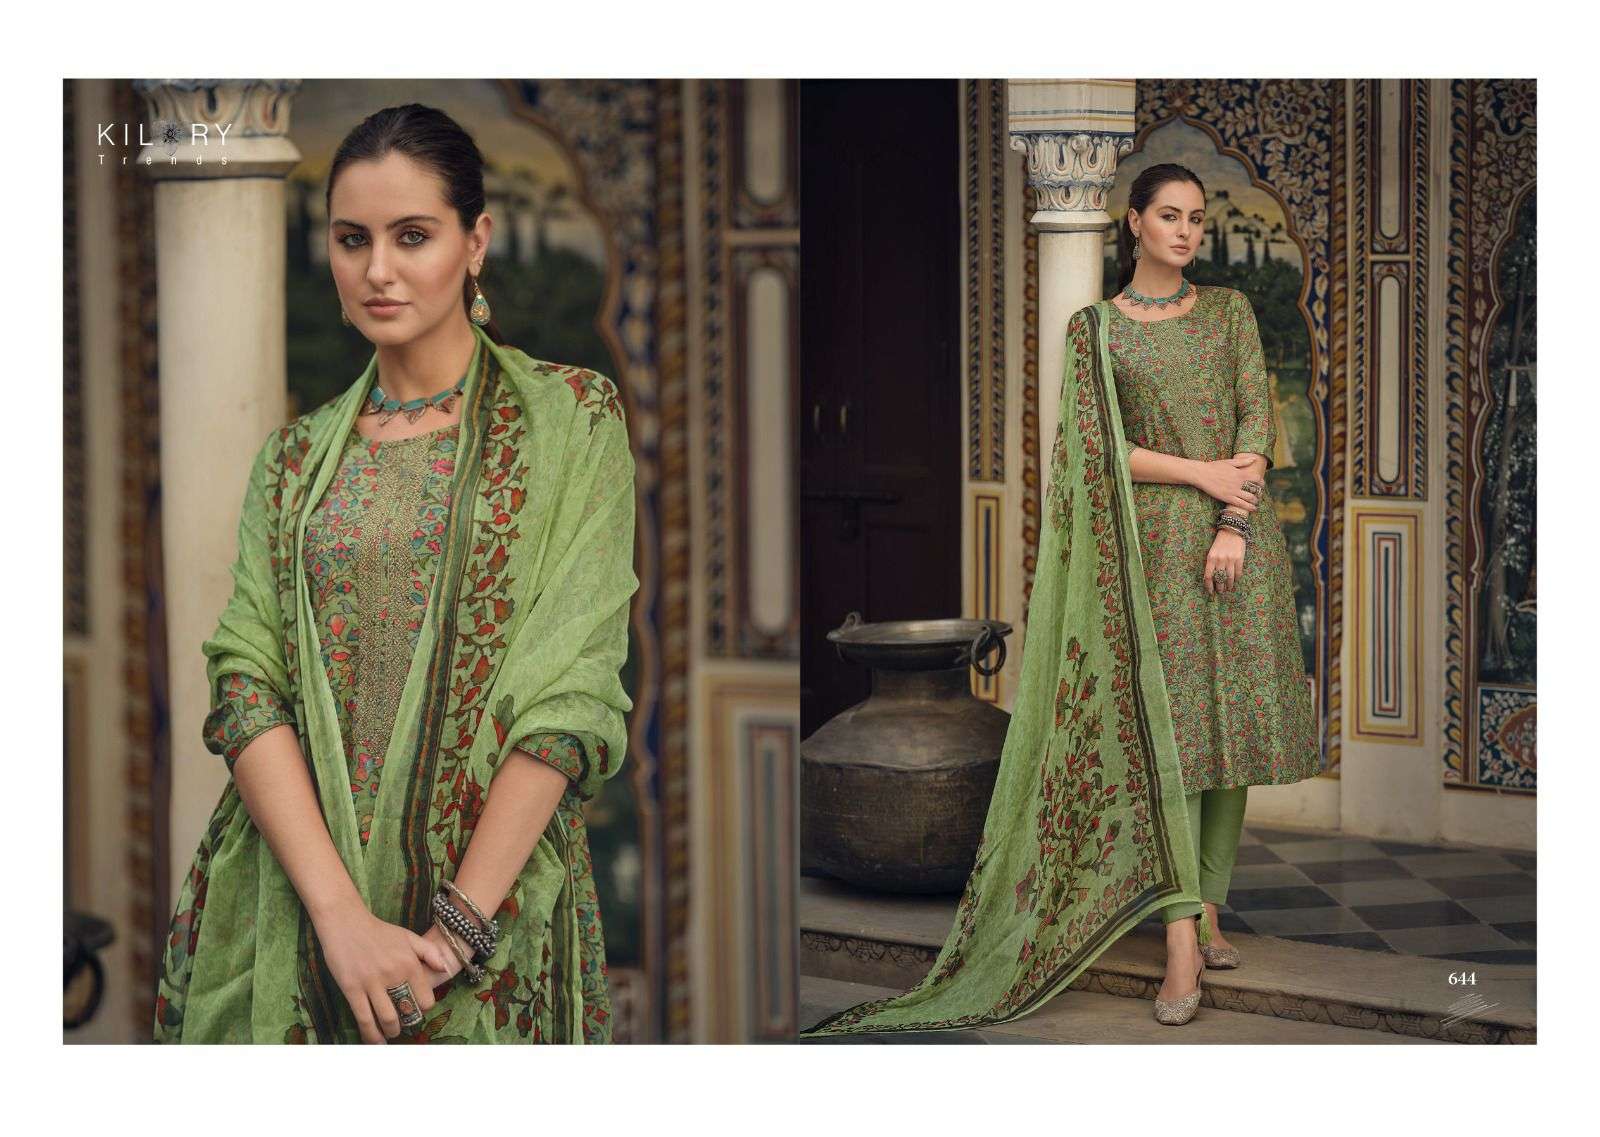 Tesoro By Kilory 641 To 648 Series Beautiful Suits Colorful Stylish Fancy Casual Wear & Ethnic Wear Pure Lawn Cotton Dresses At Wholesale Price